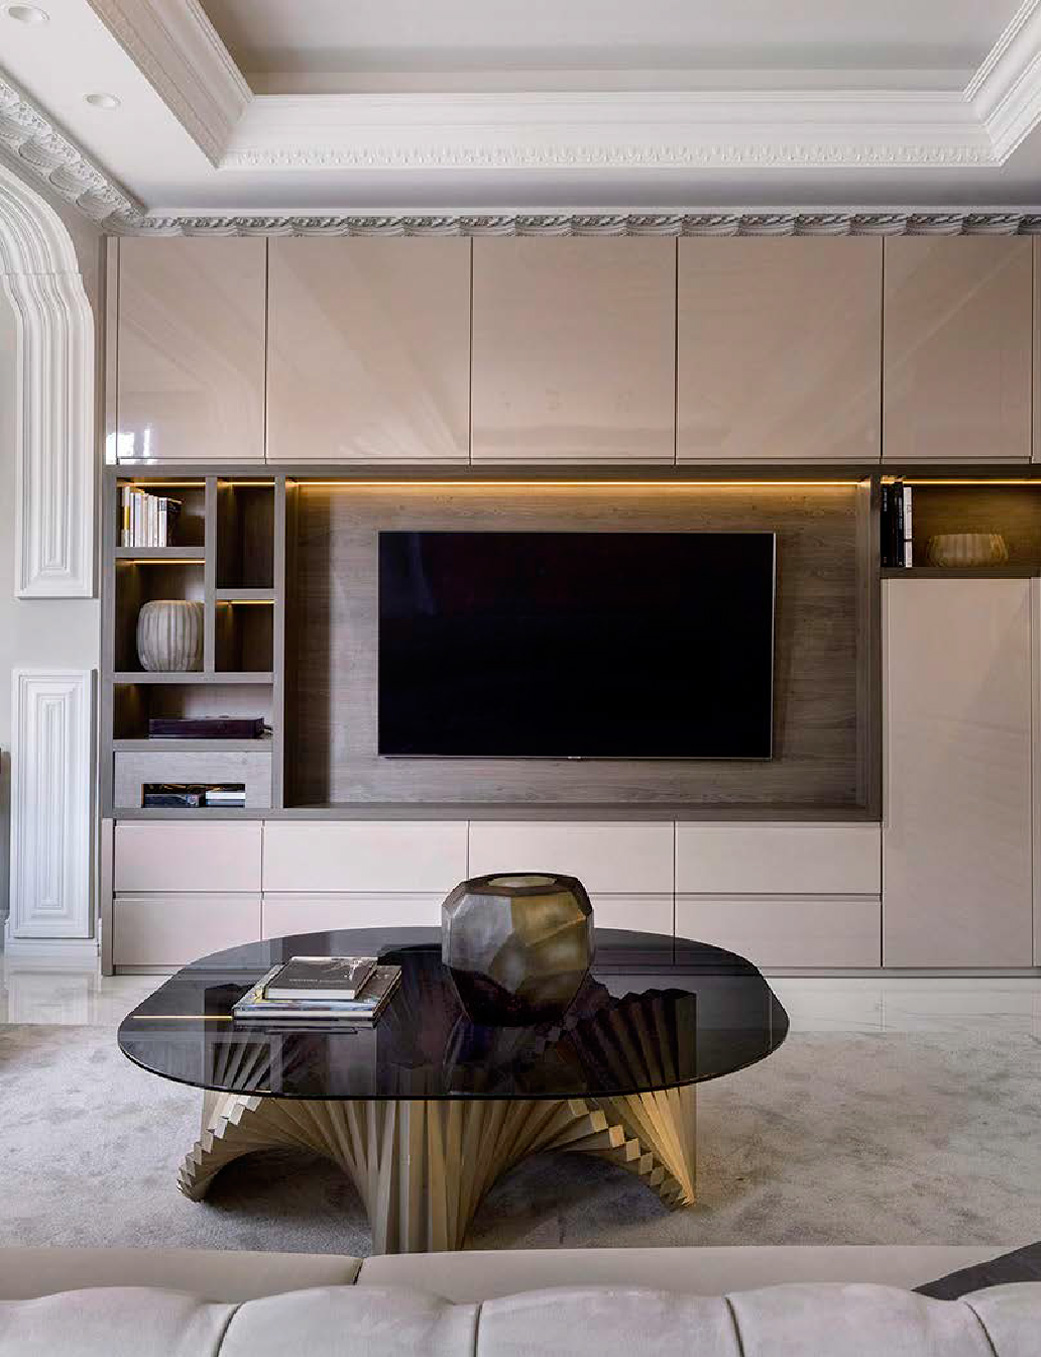 Made-to-measure and personalised wall-mounted television set for the design project of a high-end apartment.